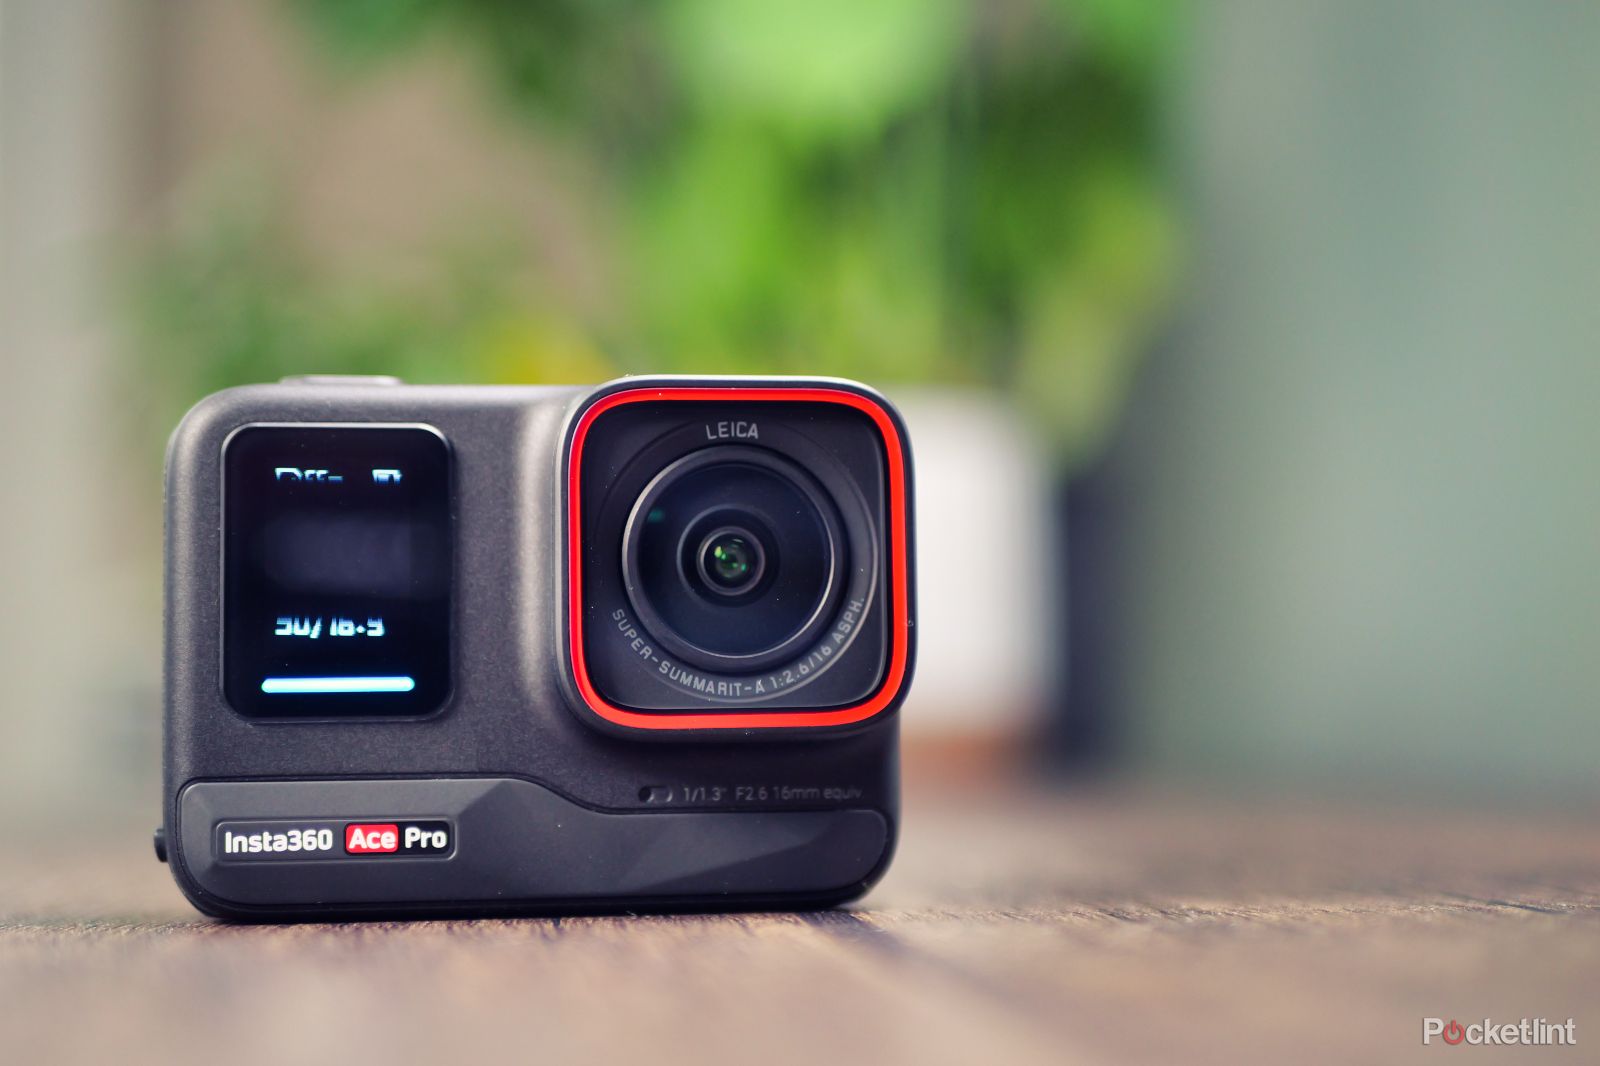 Insta360 Ace Pro review: the Leica action camera